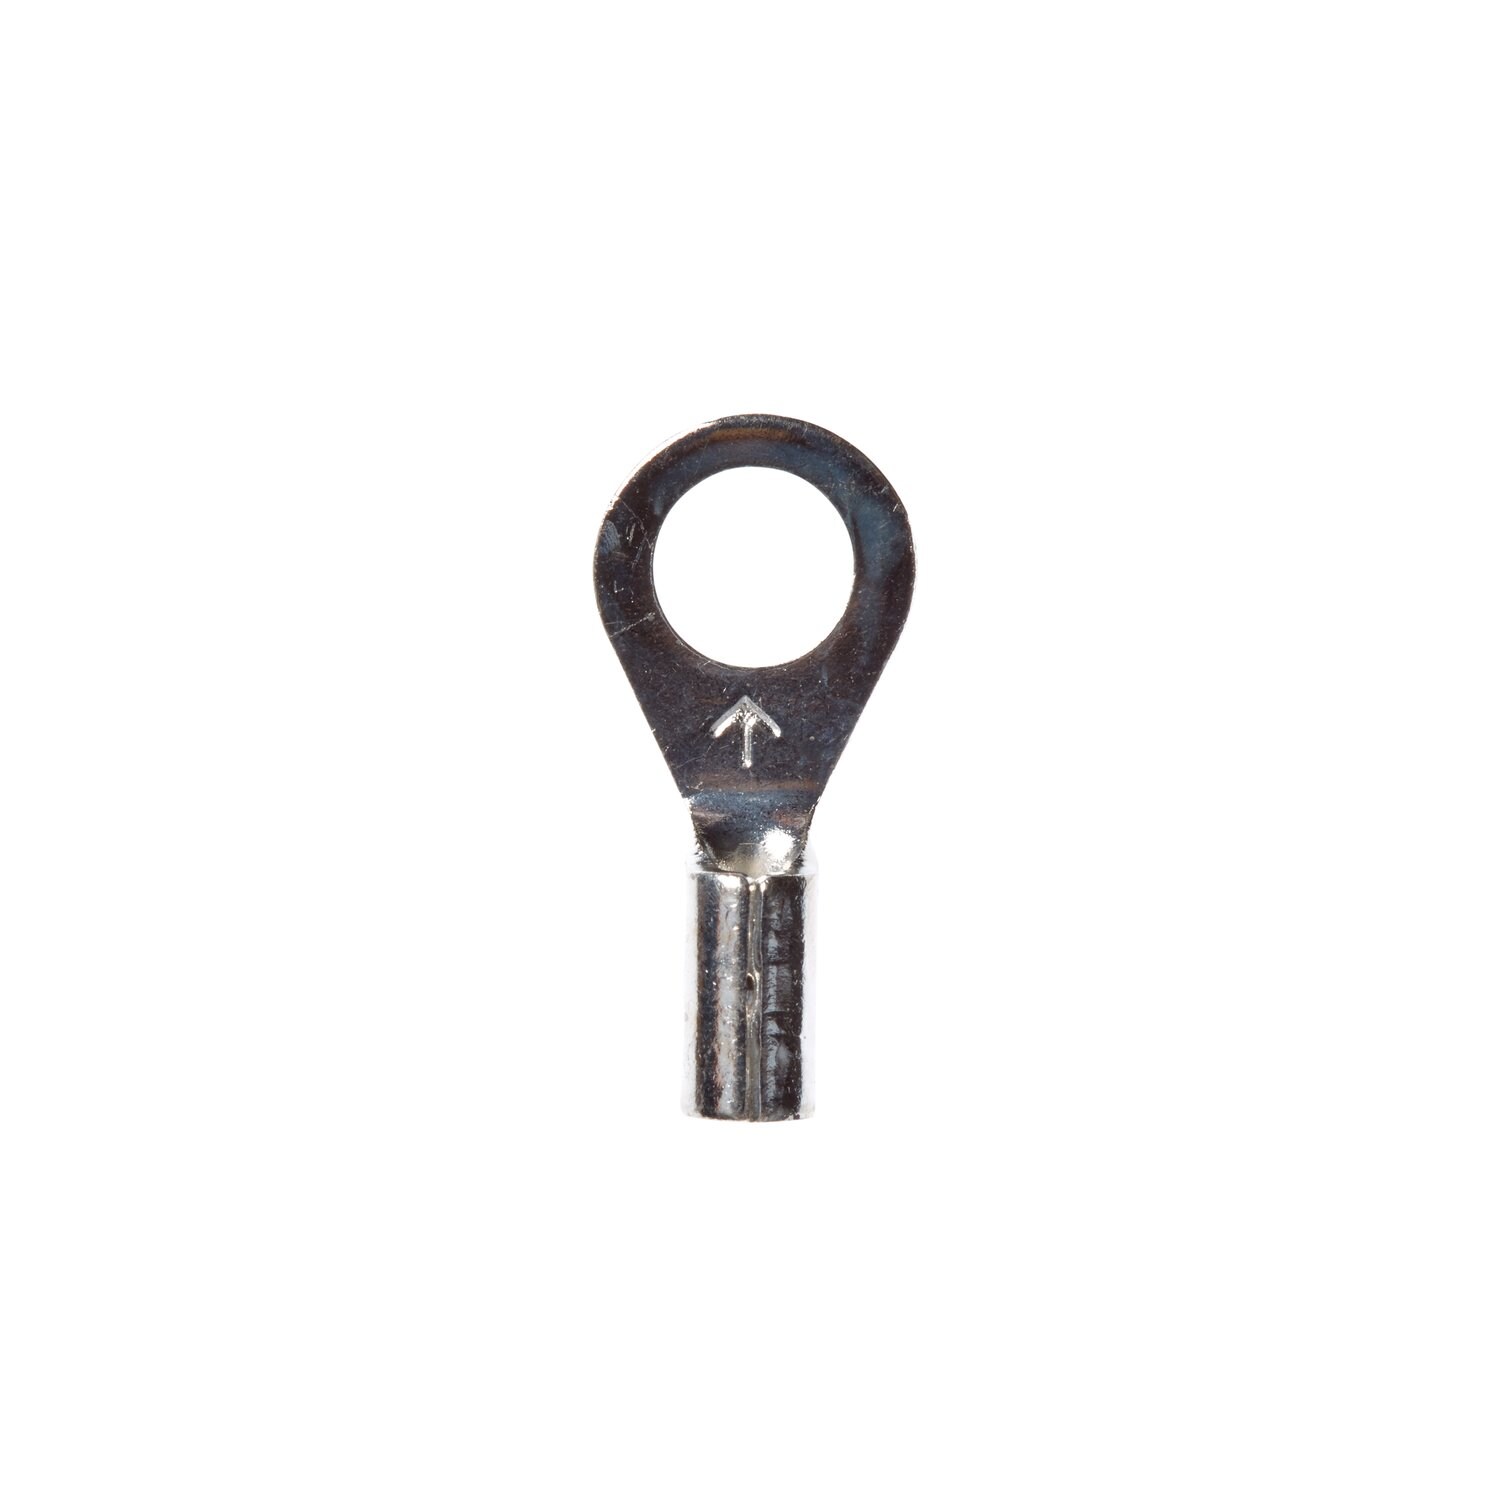 7010304206 - 3M Scotchlok Ring Non-Insulated, 100/bottle, MU18-10RX, standard-style
ring tongue fits around the stud, 500/Case